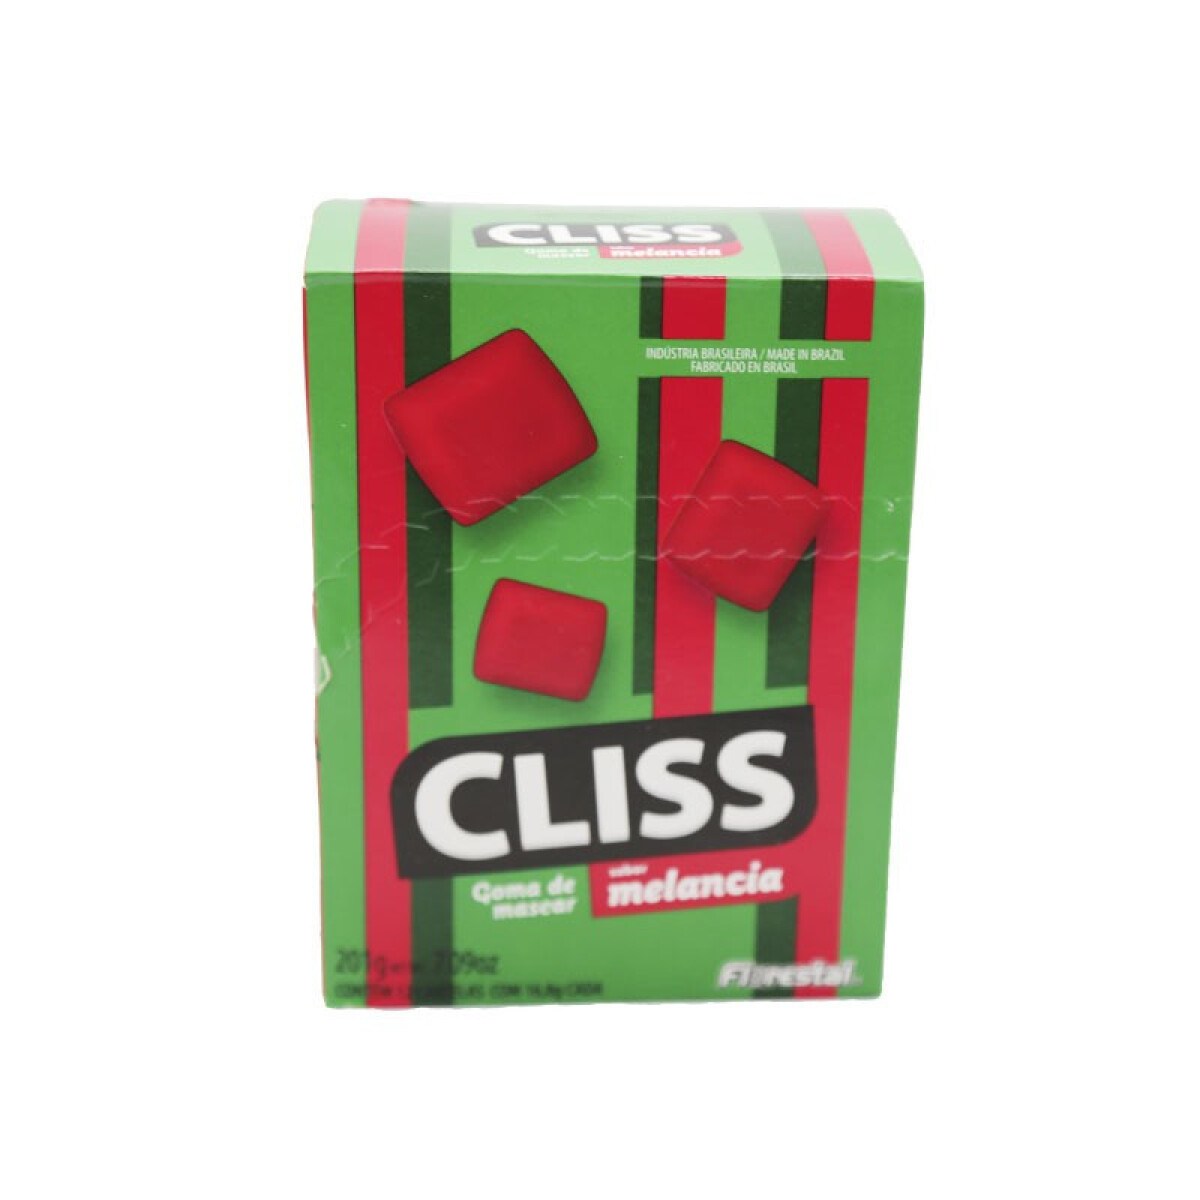 Chicle Cliss x12 - Sandía 